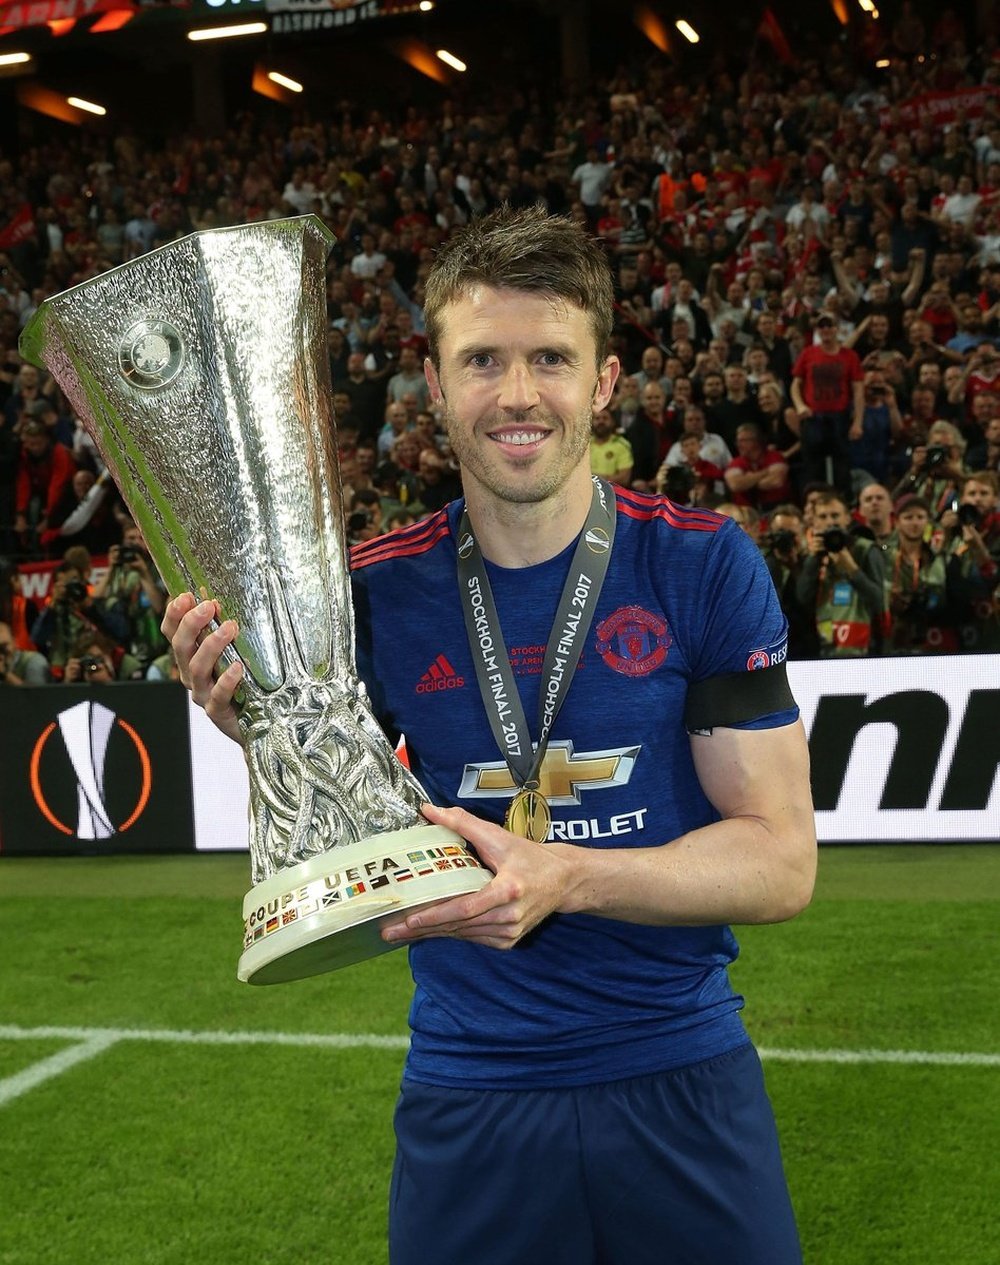 Carrick might play as long as ManUtd legend Ryan Giggs.United